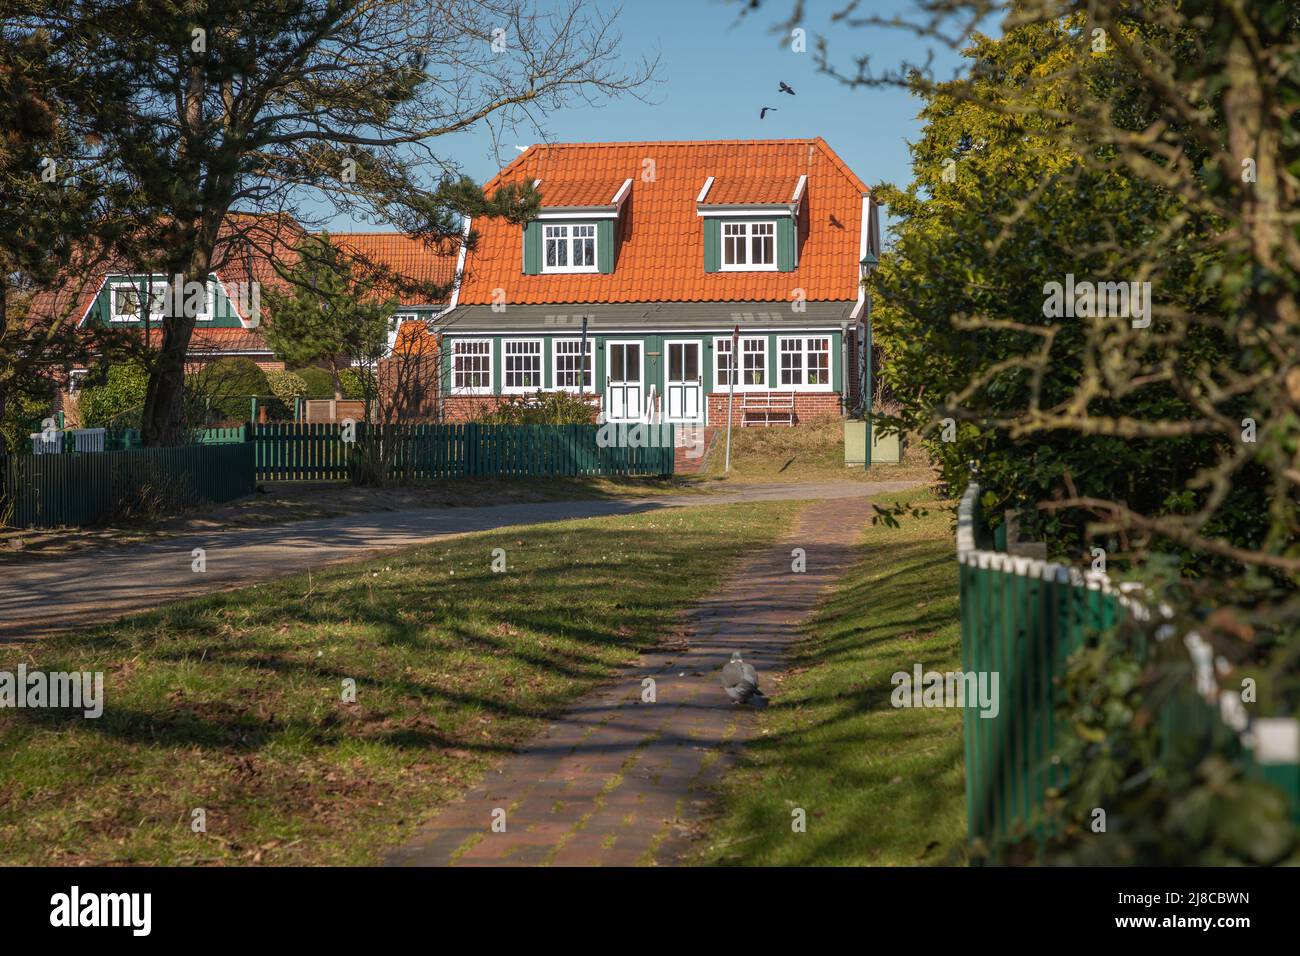 Typical fresian building, Spiekeroog, Germany Stock Photo